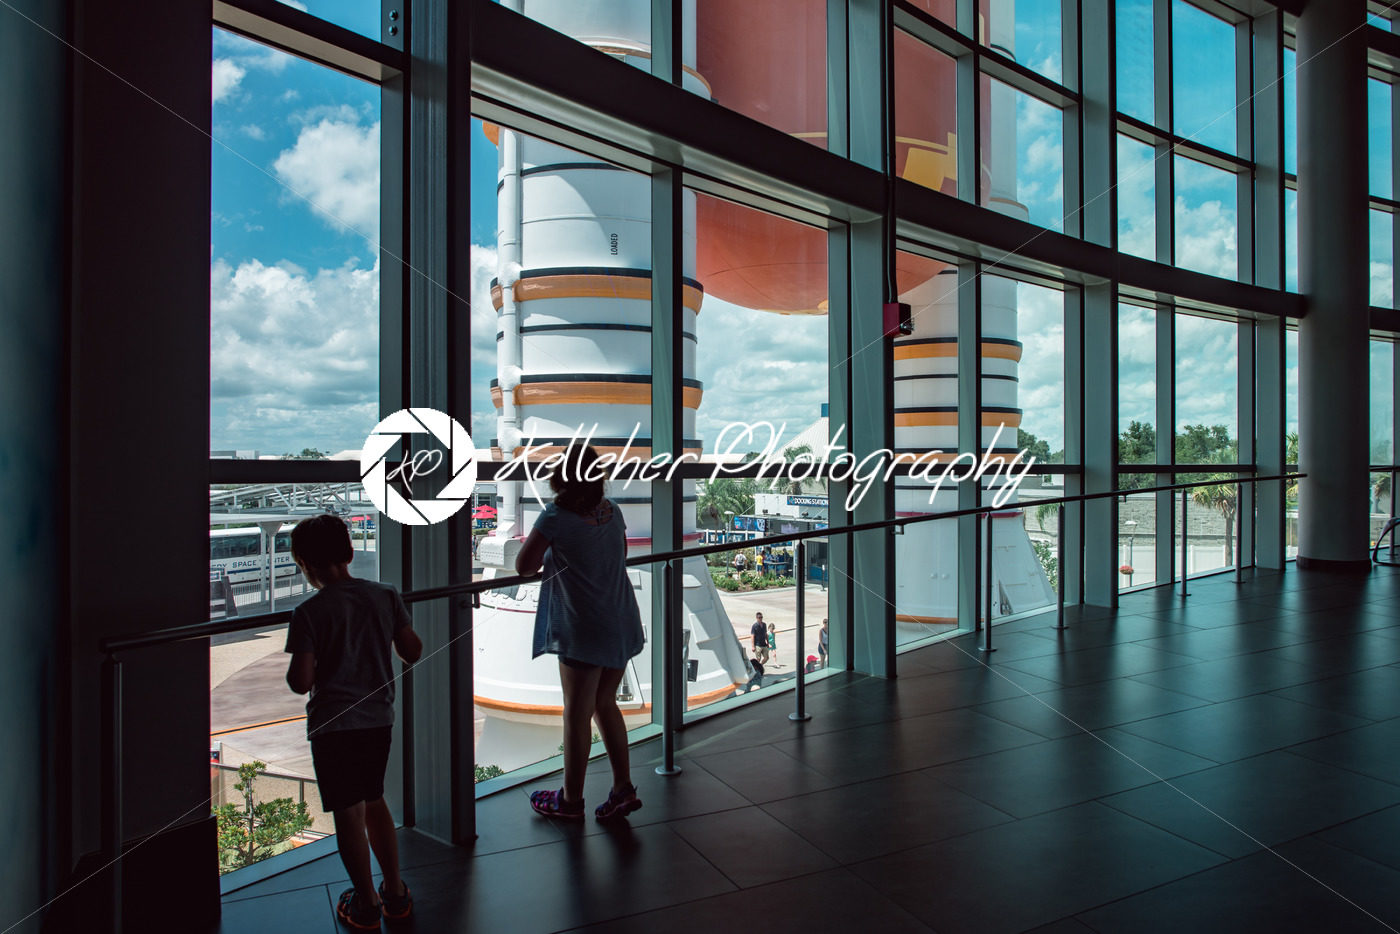 Cape Canaveral, Florida – August 13, 2018: Kids looking out at Atlantis Space Shuttle Rocket Booster at NASA Kennedy Space Center - Kelleher Photography Store